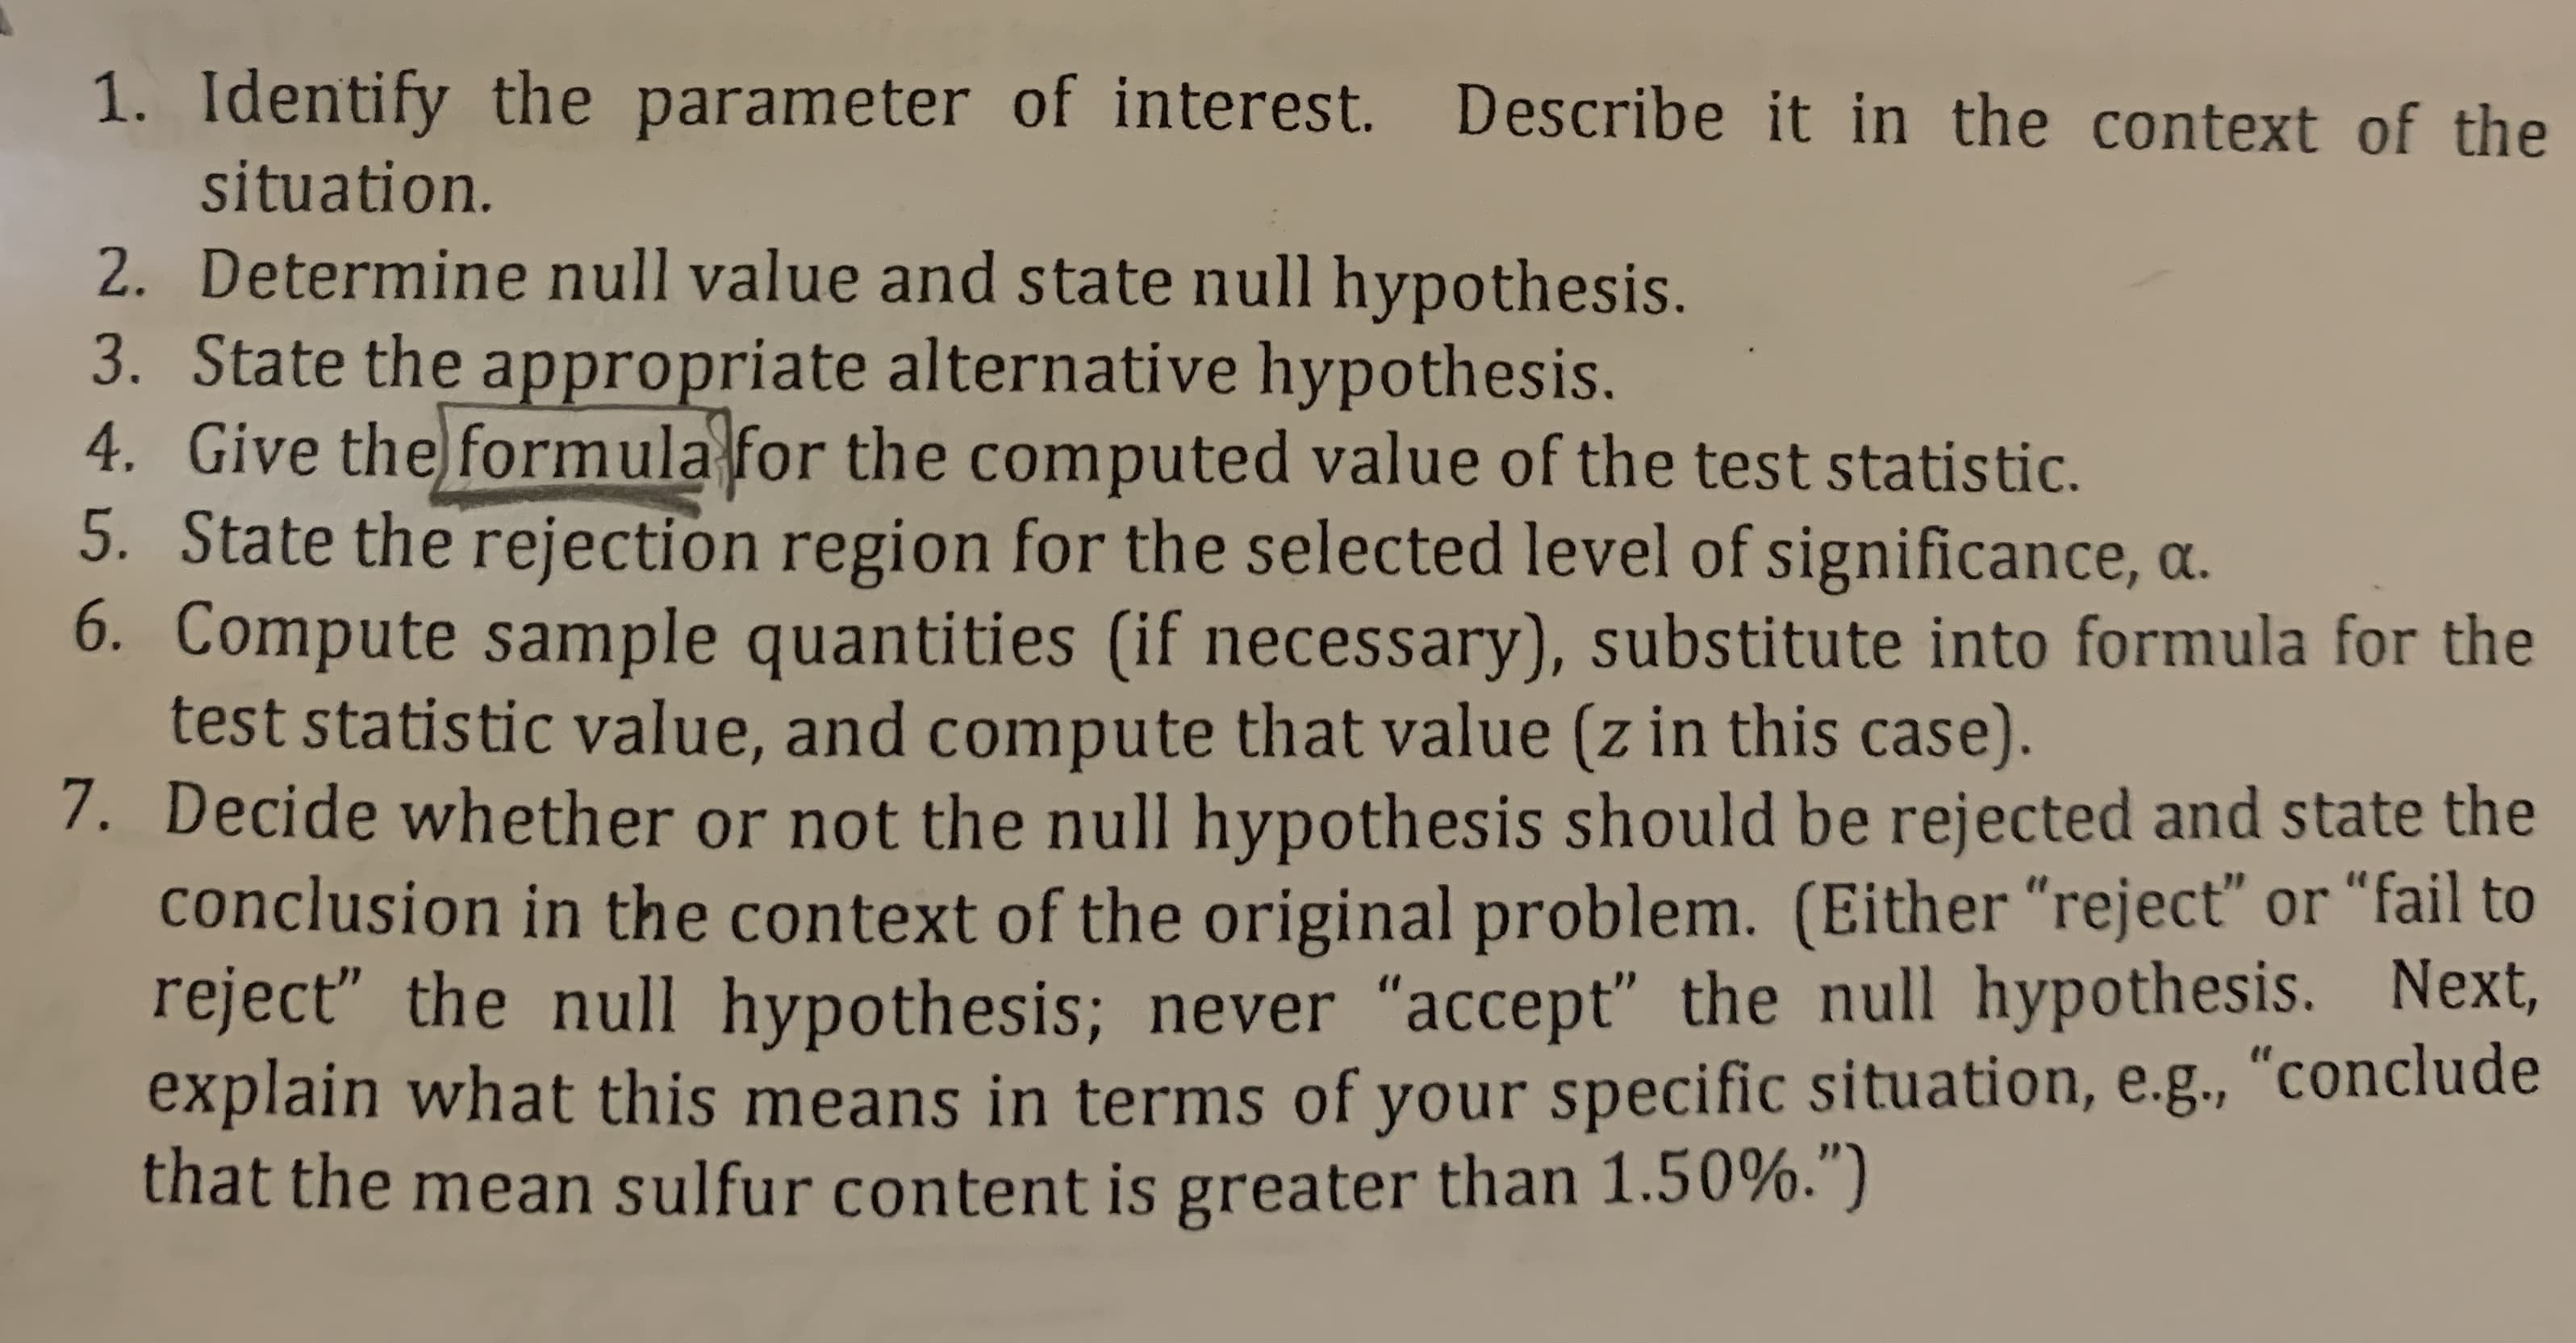 1. Identify the parameter of interest. Describe it in the context of the
situation.
2. Determine null value and state null hypothesis.
3. State the appropriate alternative hypothesis.
4. Give the formula for the computed value of the test statistic.
5. State the rejection region for the selected level of significance, a.
6. Compute sample quantities (if necessary), substitute into formula for the
test statistic value, and compute that value (z in this case).
7. Decide whether or not the null hypothesis should be rejected and state the
conclusion in the context of the original problem. (Either "reject" or "fail to
reject the null hypothesis; never "accept" the null hypothesis. Next,
explain what this means in terms of your specific situation, e.g., "conclude
that the mean sulfur content is greater than 1.50%.")
